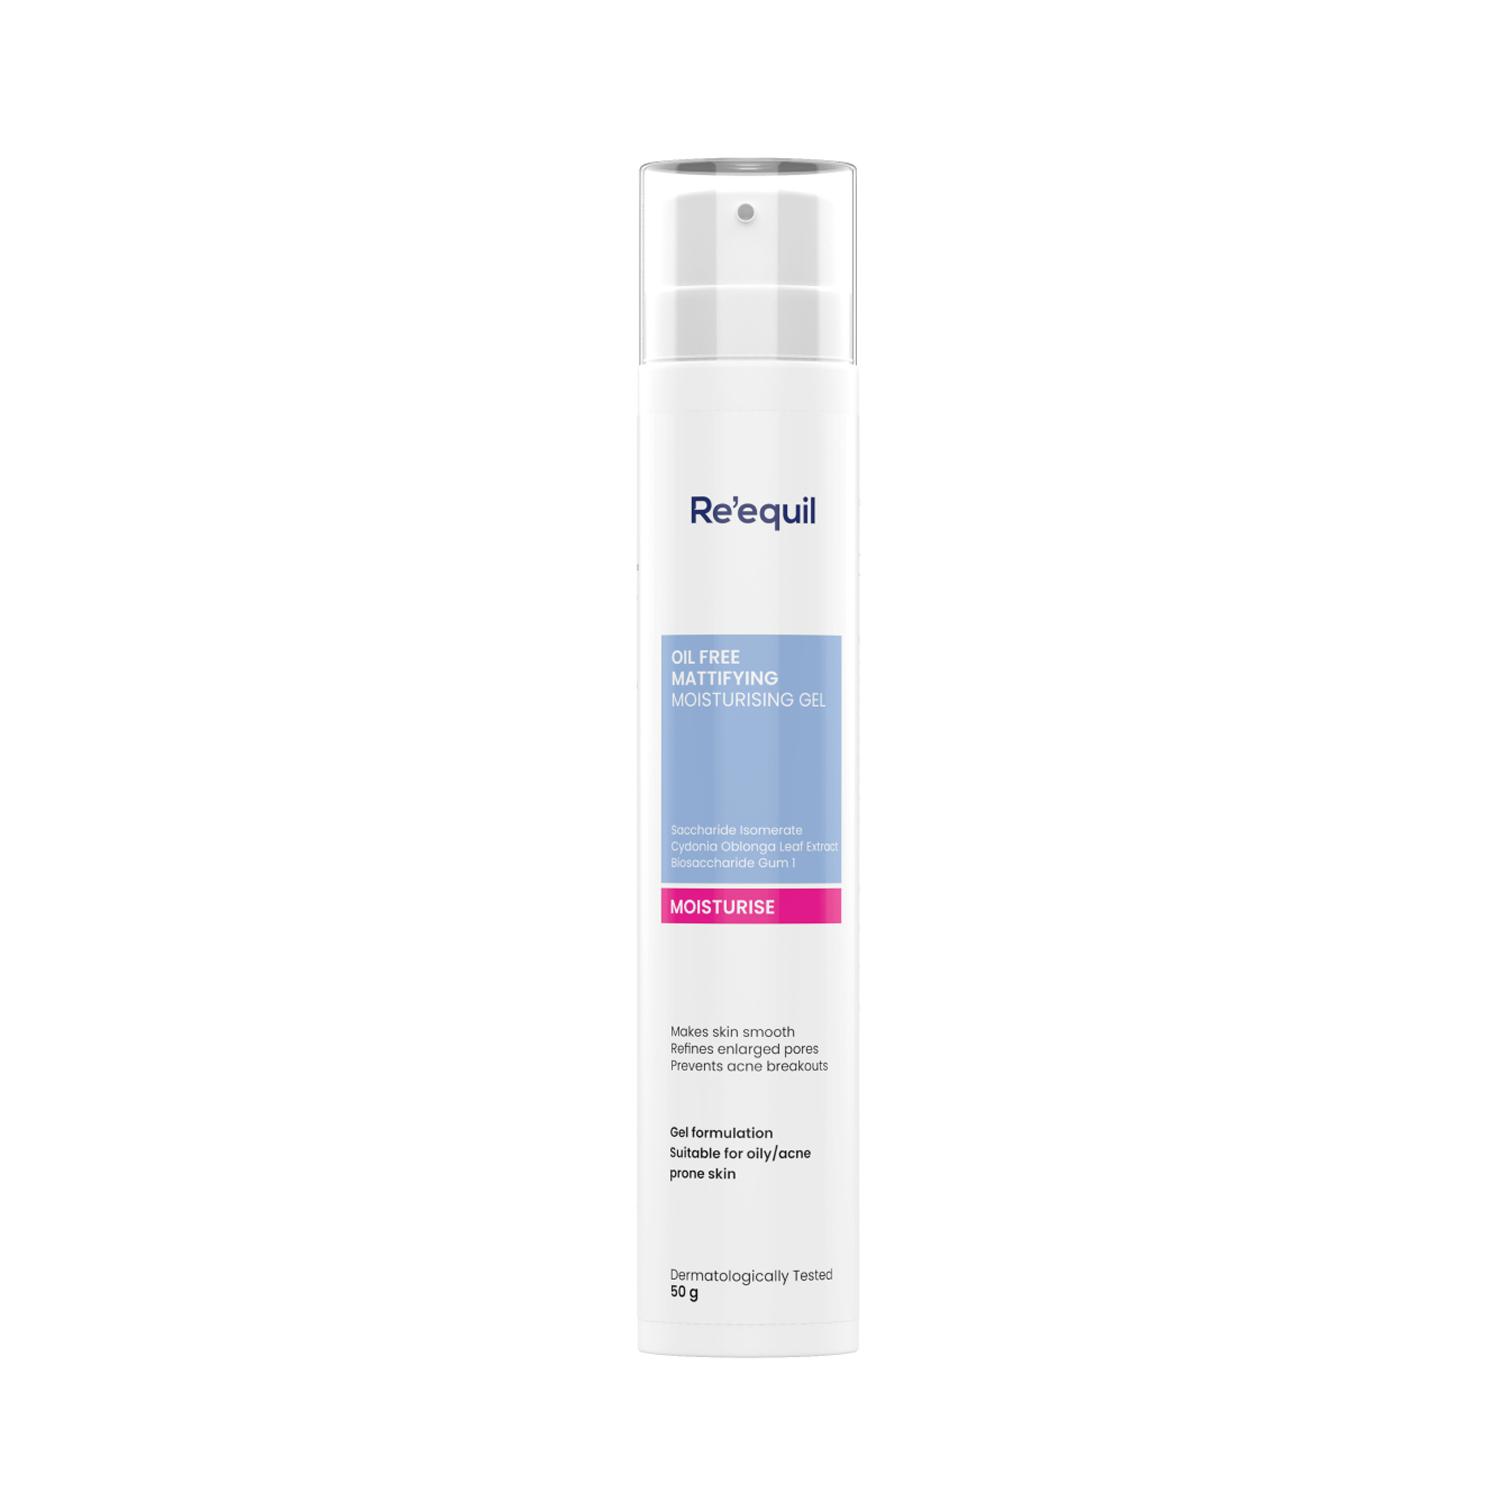 Re'equil | Re'equil Oil Free Mattifying Moisturizer (50g)